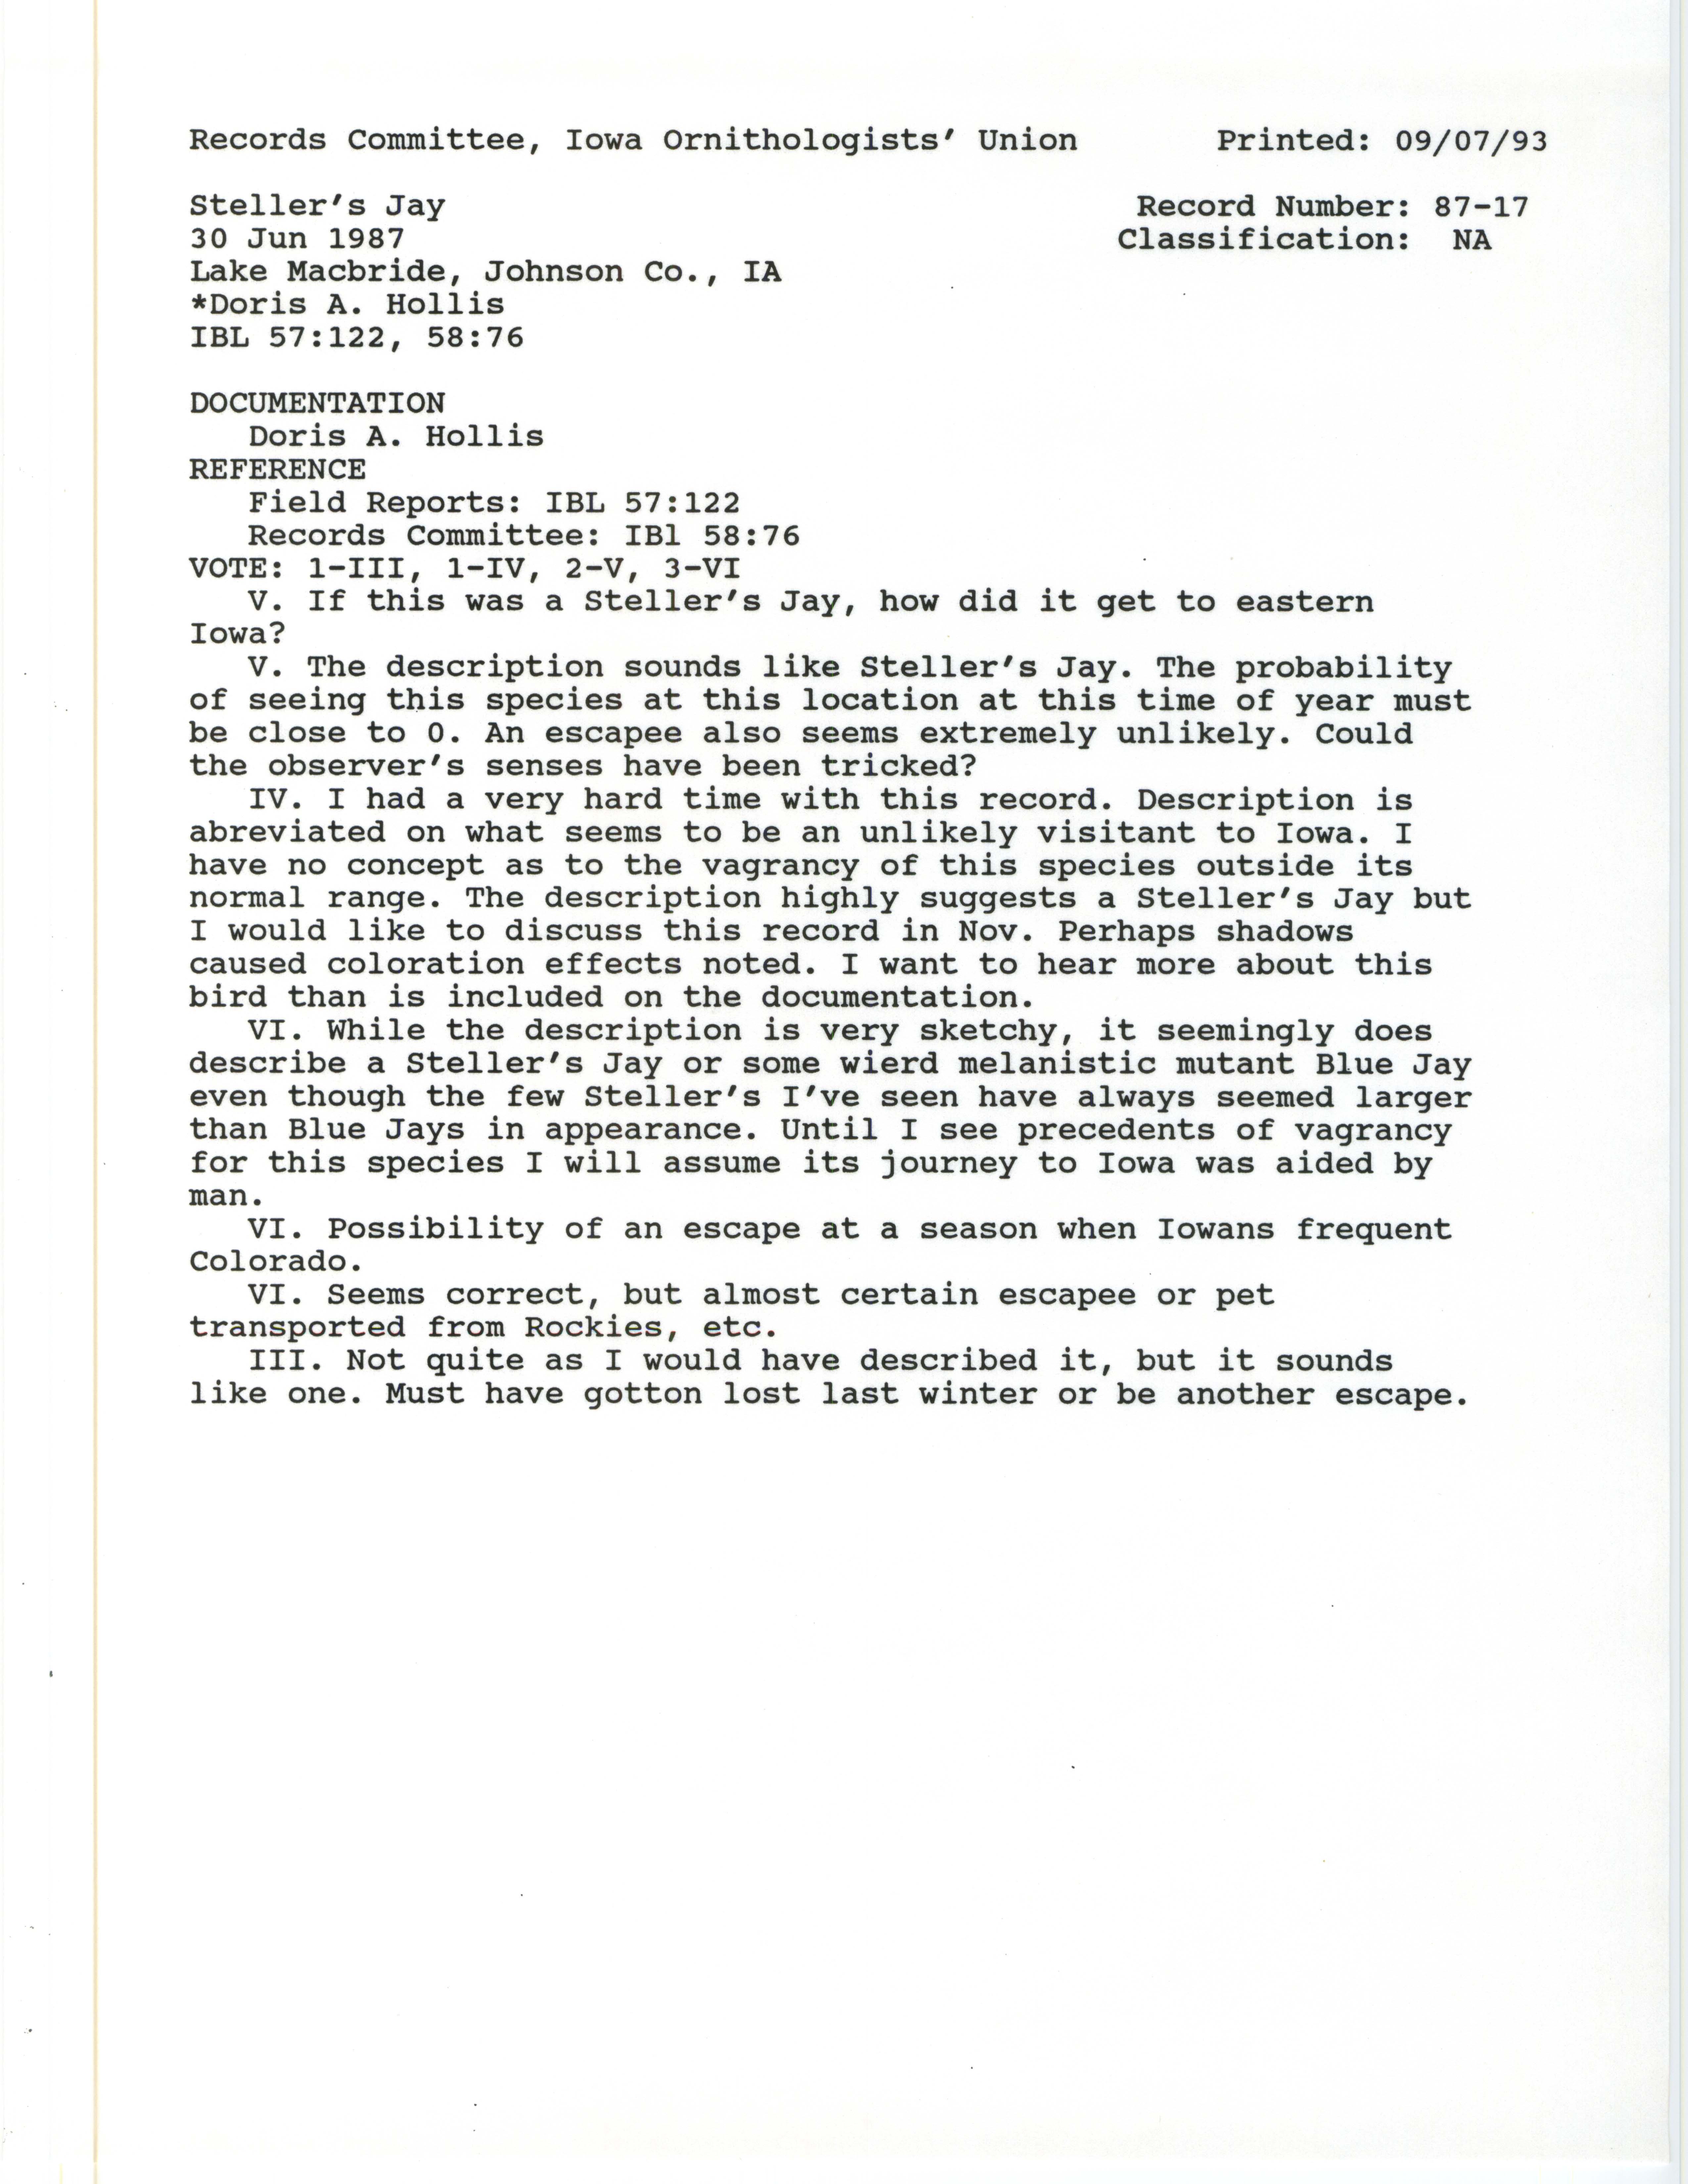 Records Committee review for rare bird sighting for Steller's Jay at Lake MacBride, 1987